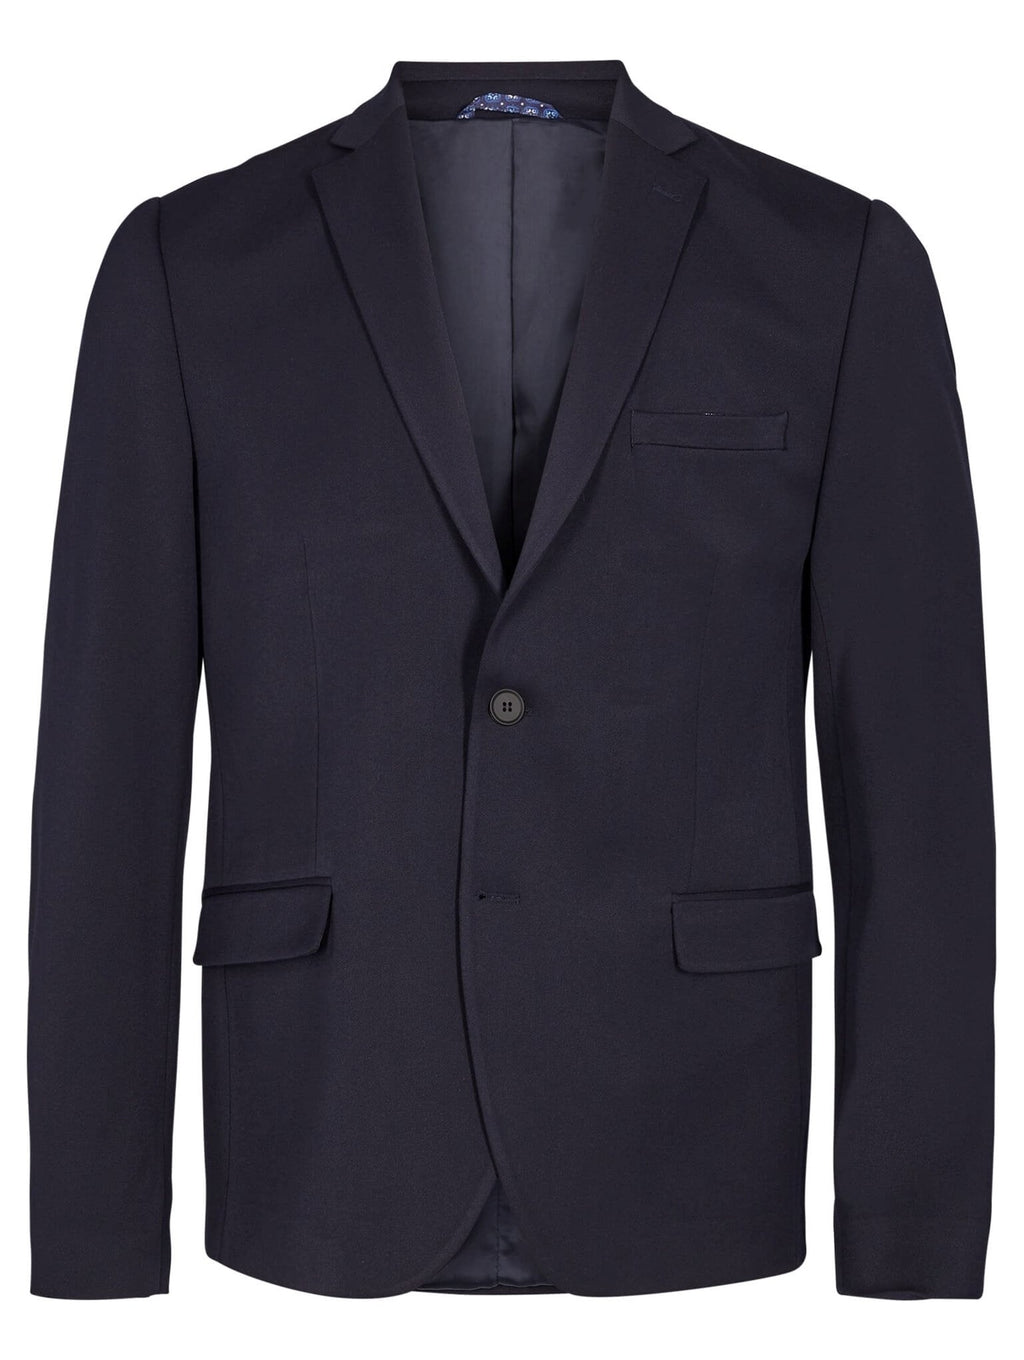 Frederic Suit Jacket - Navy